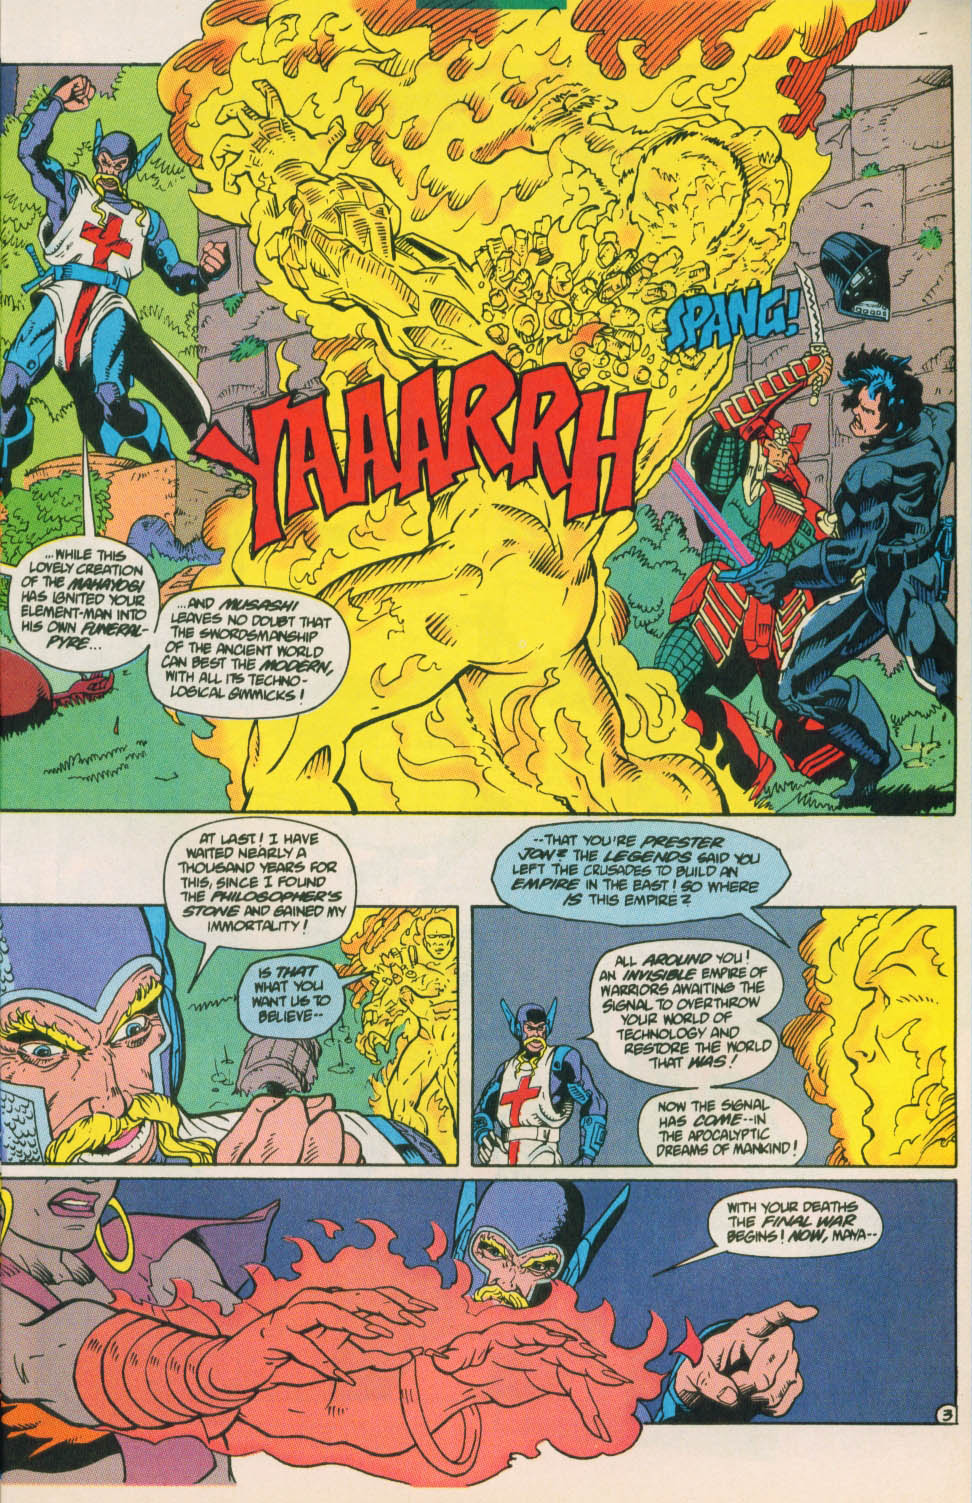 Justice League International (1993) 64 Page 3